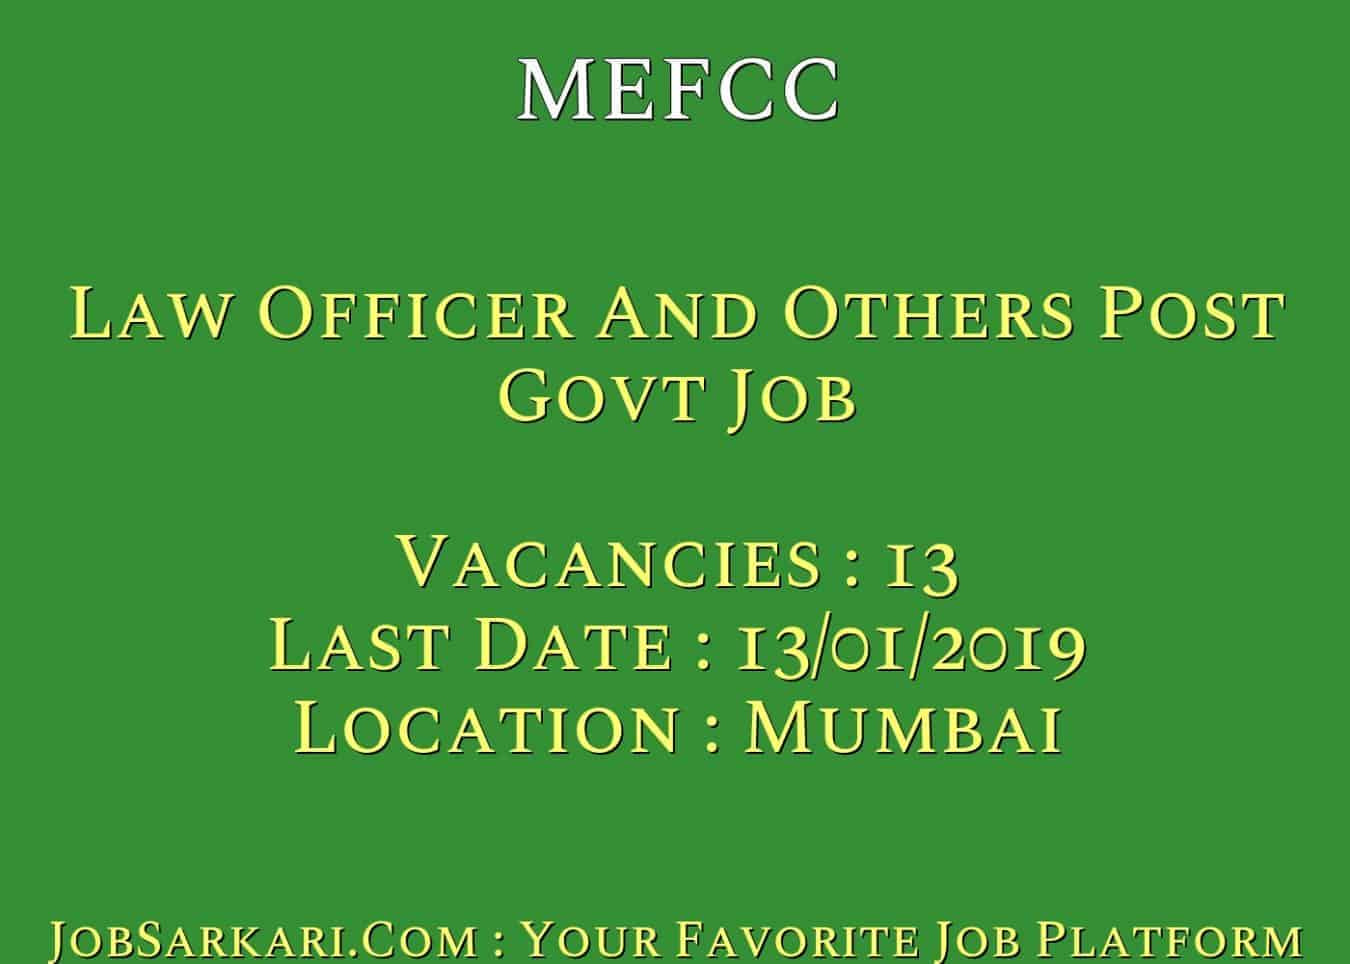 MEFCC Recruitment 2019 For Law Officer And Others Post Govt Job